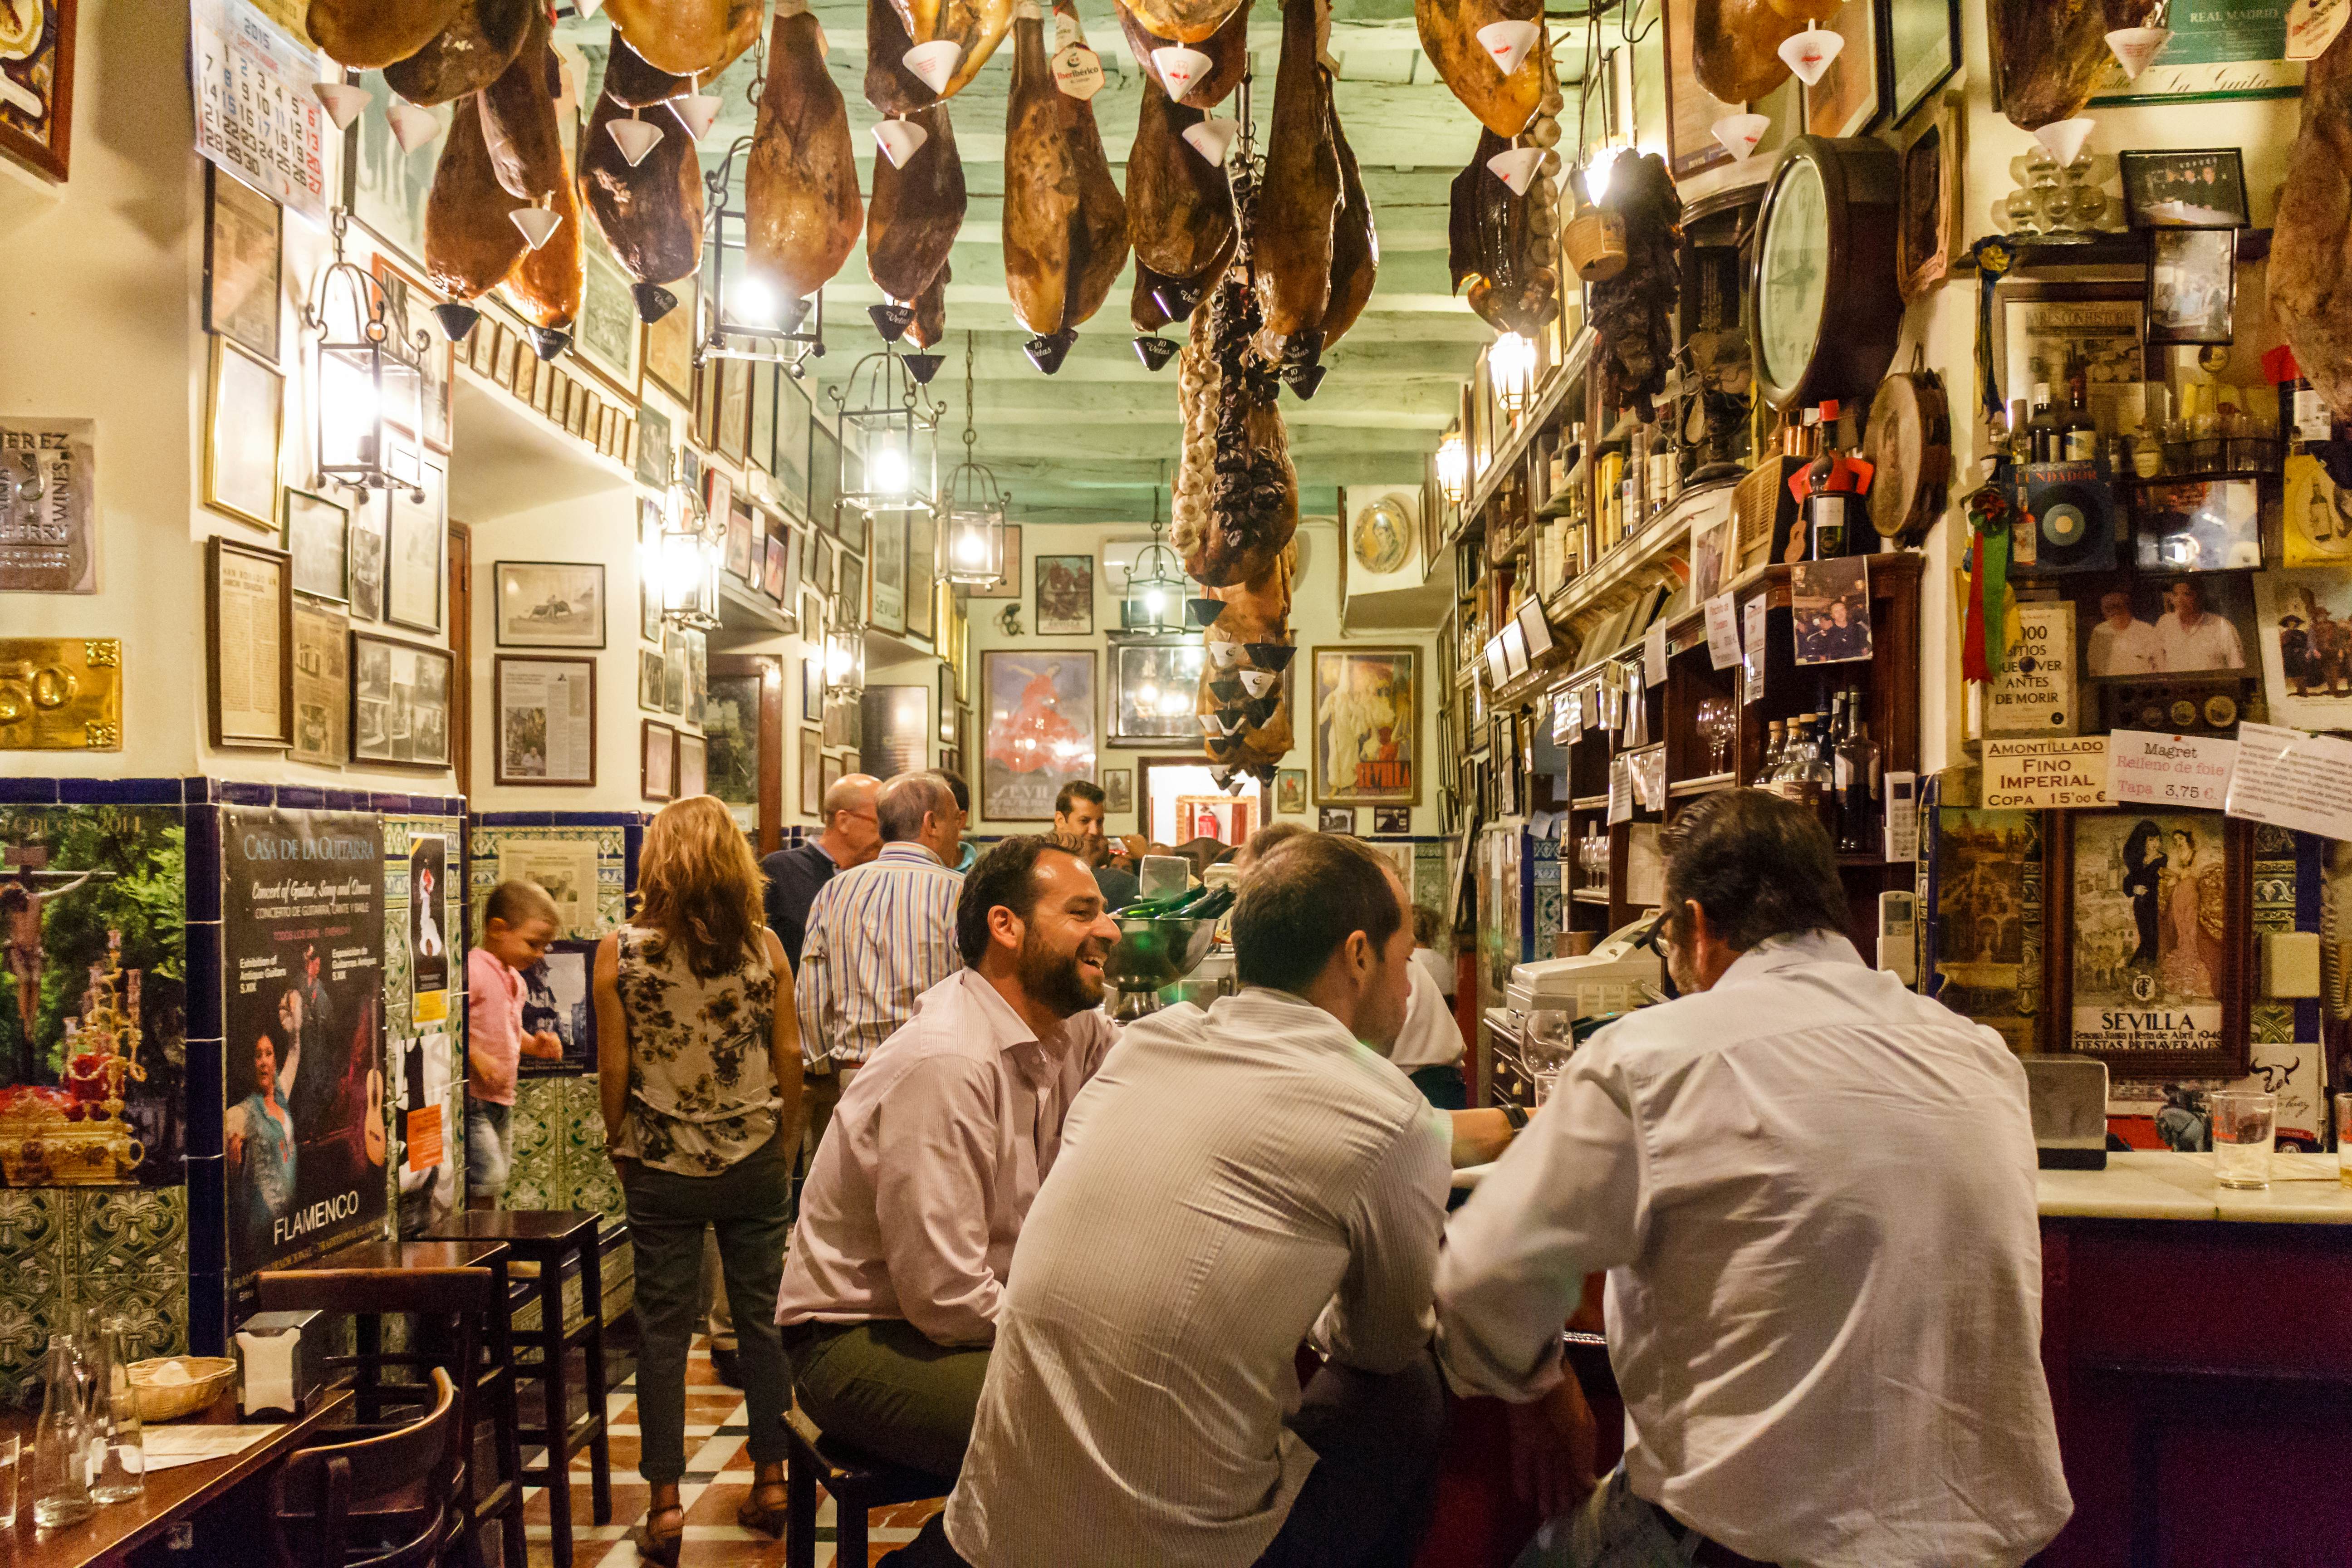 Is Spain's late&night dining culture about to change?